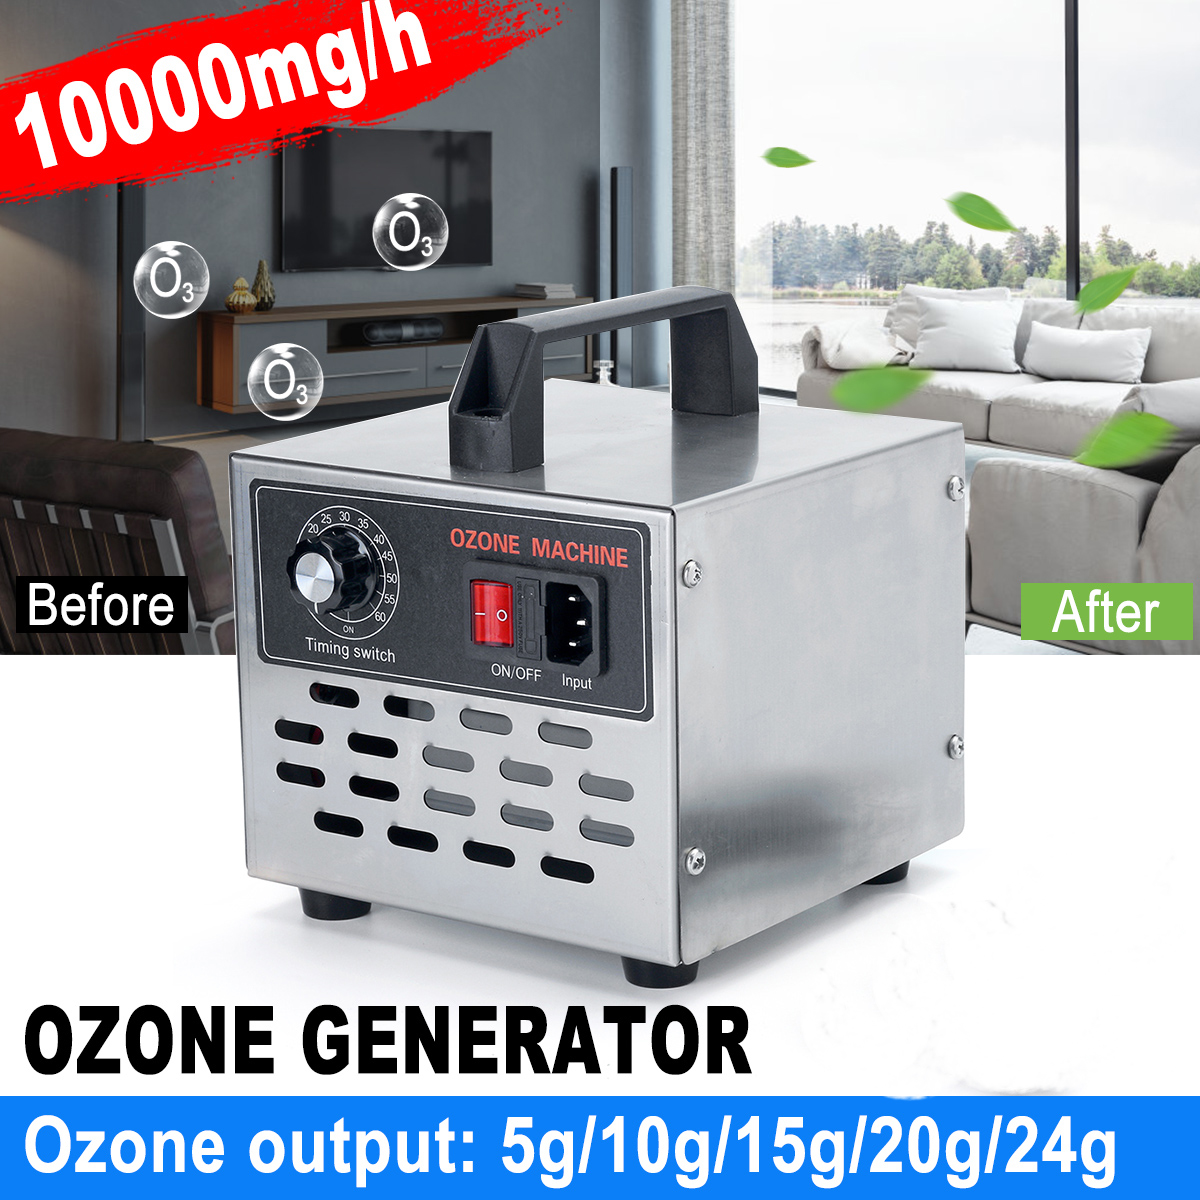 5g-24g-Ozone-Generator-Ozone-Machine-Stainless-Steel-Air-Purifier-Air-Cleaner-Disinfection-Cleaning-1678702-1